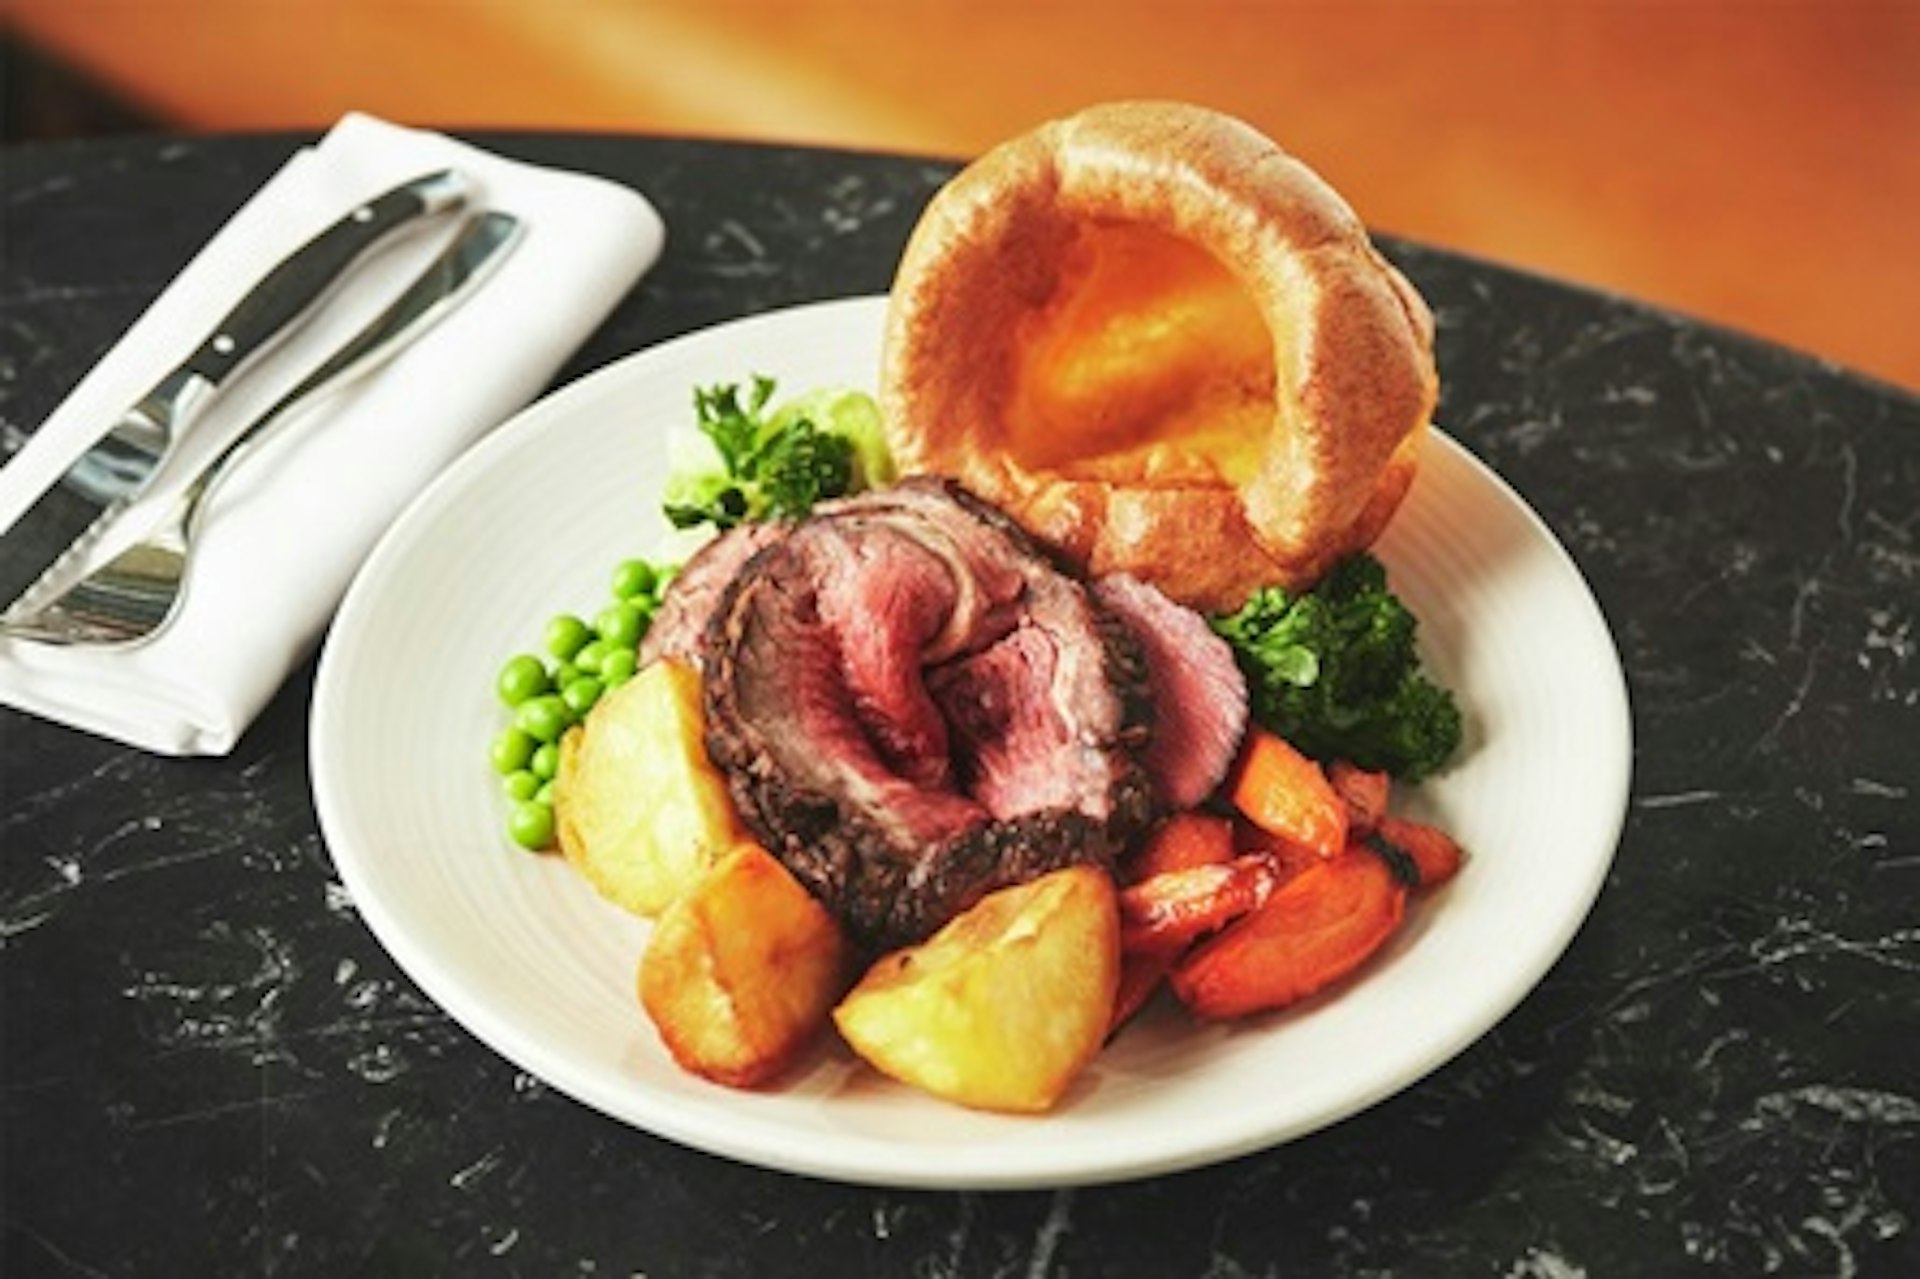 Sunday Roast for Two at a Gordon Ramsay Restaurant 4